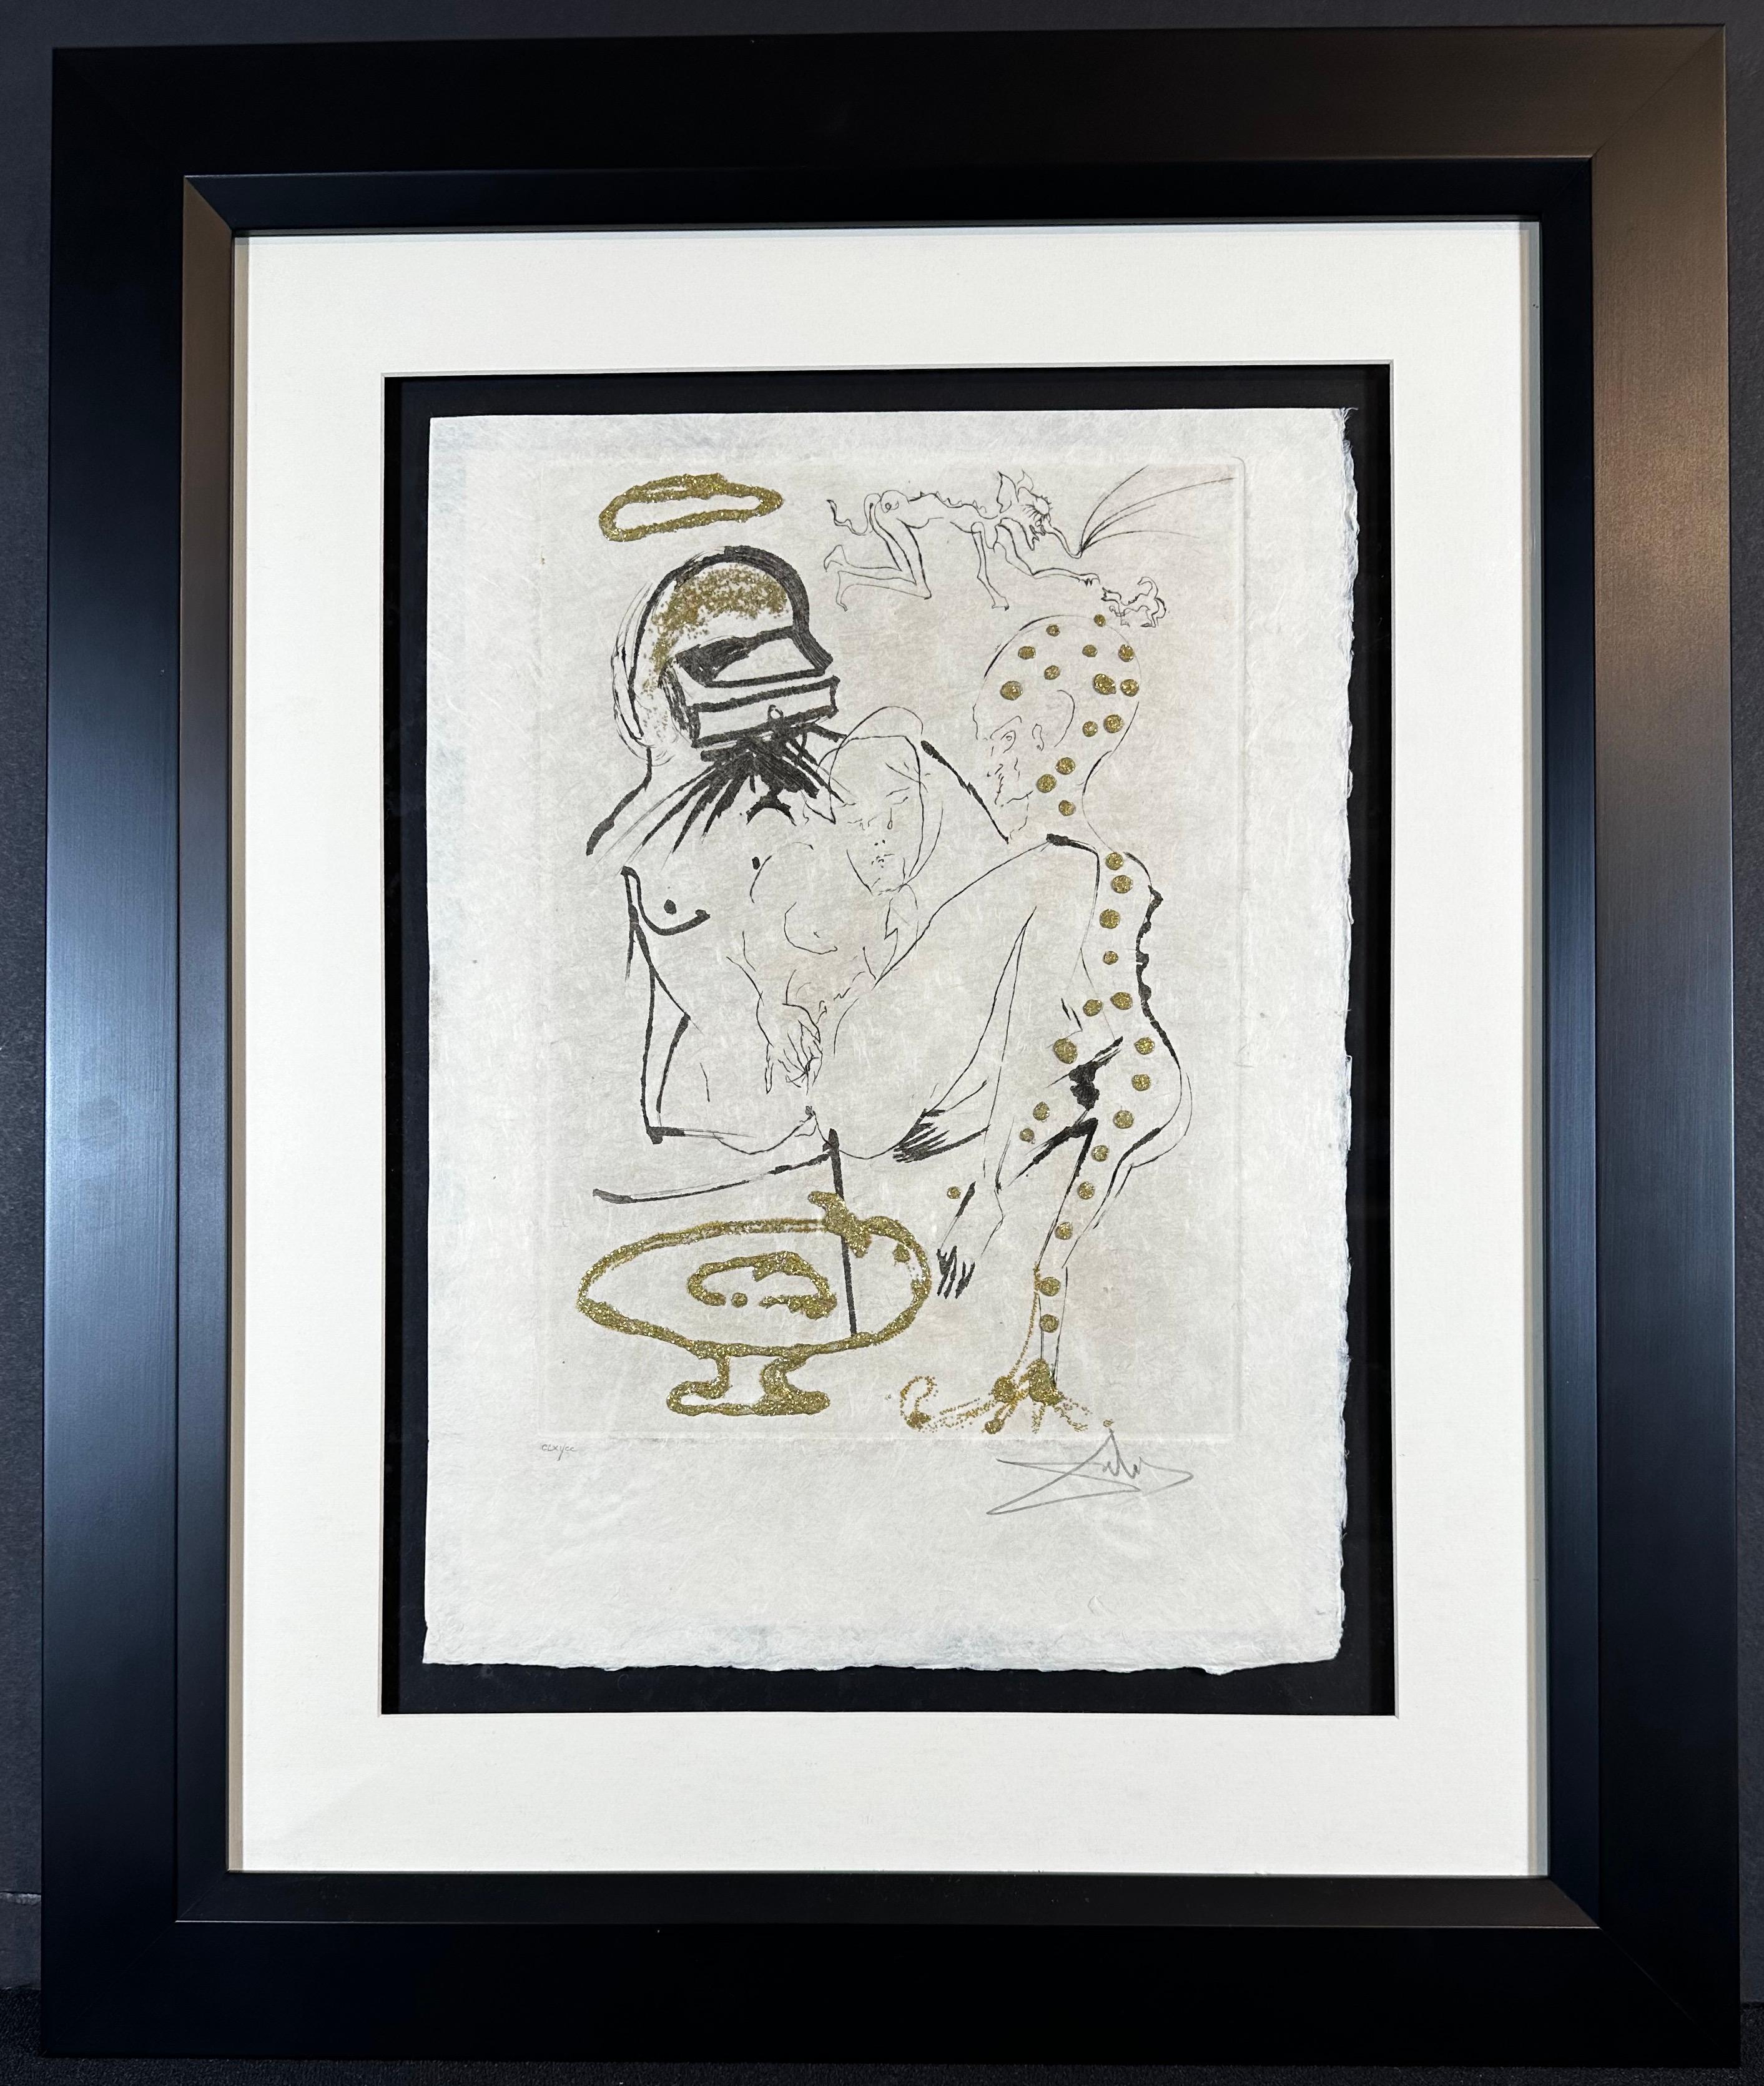 ARTIST: Salvador Dali

TITLE: Les Amours Jaunes Duel With Camelias

MEDIUM: Etching + Gold Flakes

SIGNED: Hand Signed 

EDITION NUMBER:  CLXII/CC

MEASUREMENTS: 11